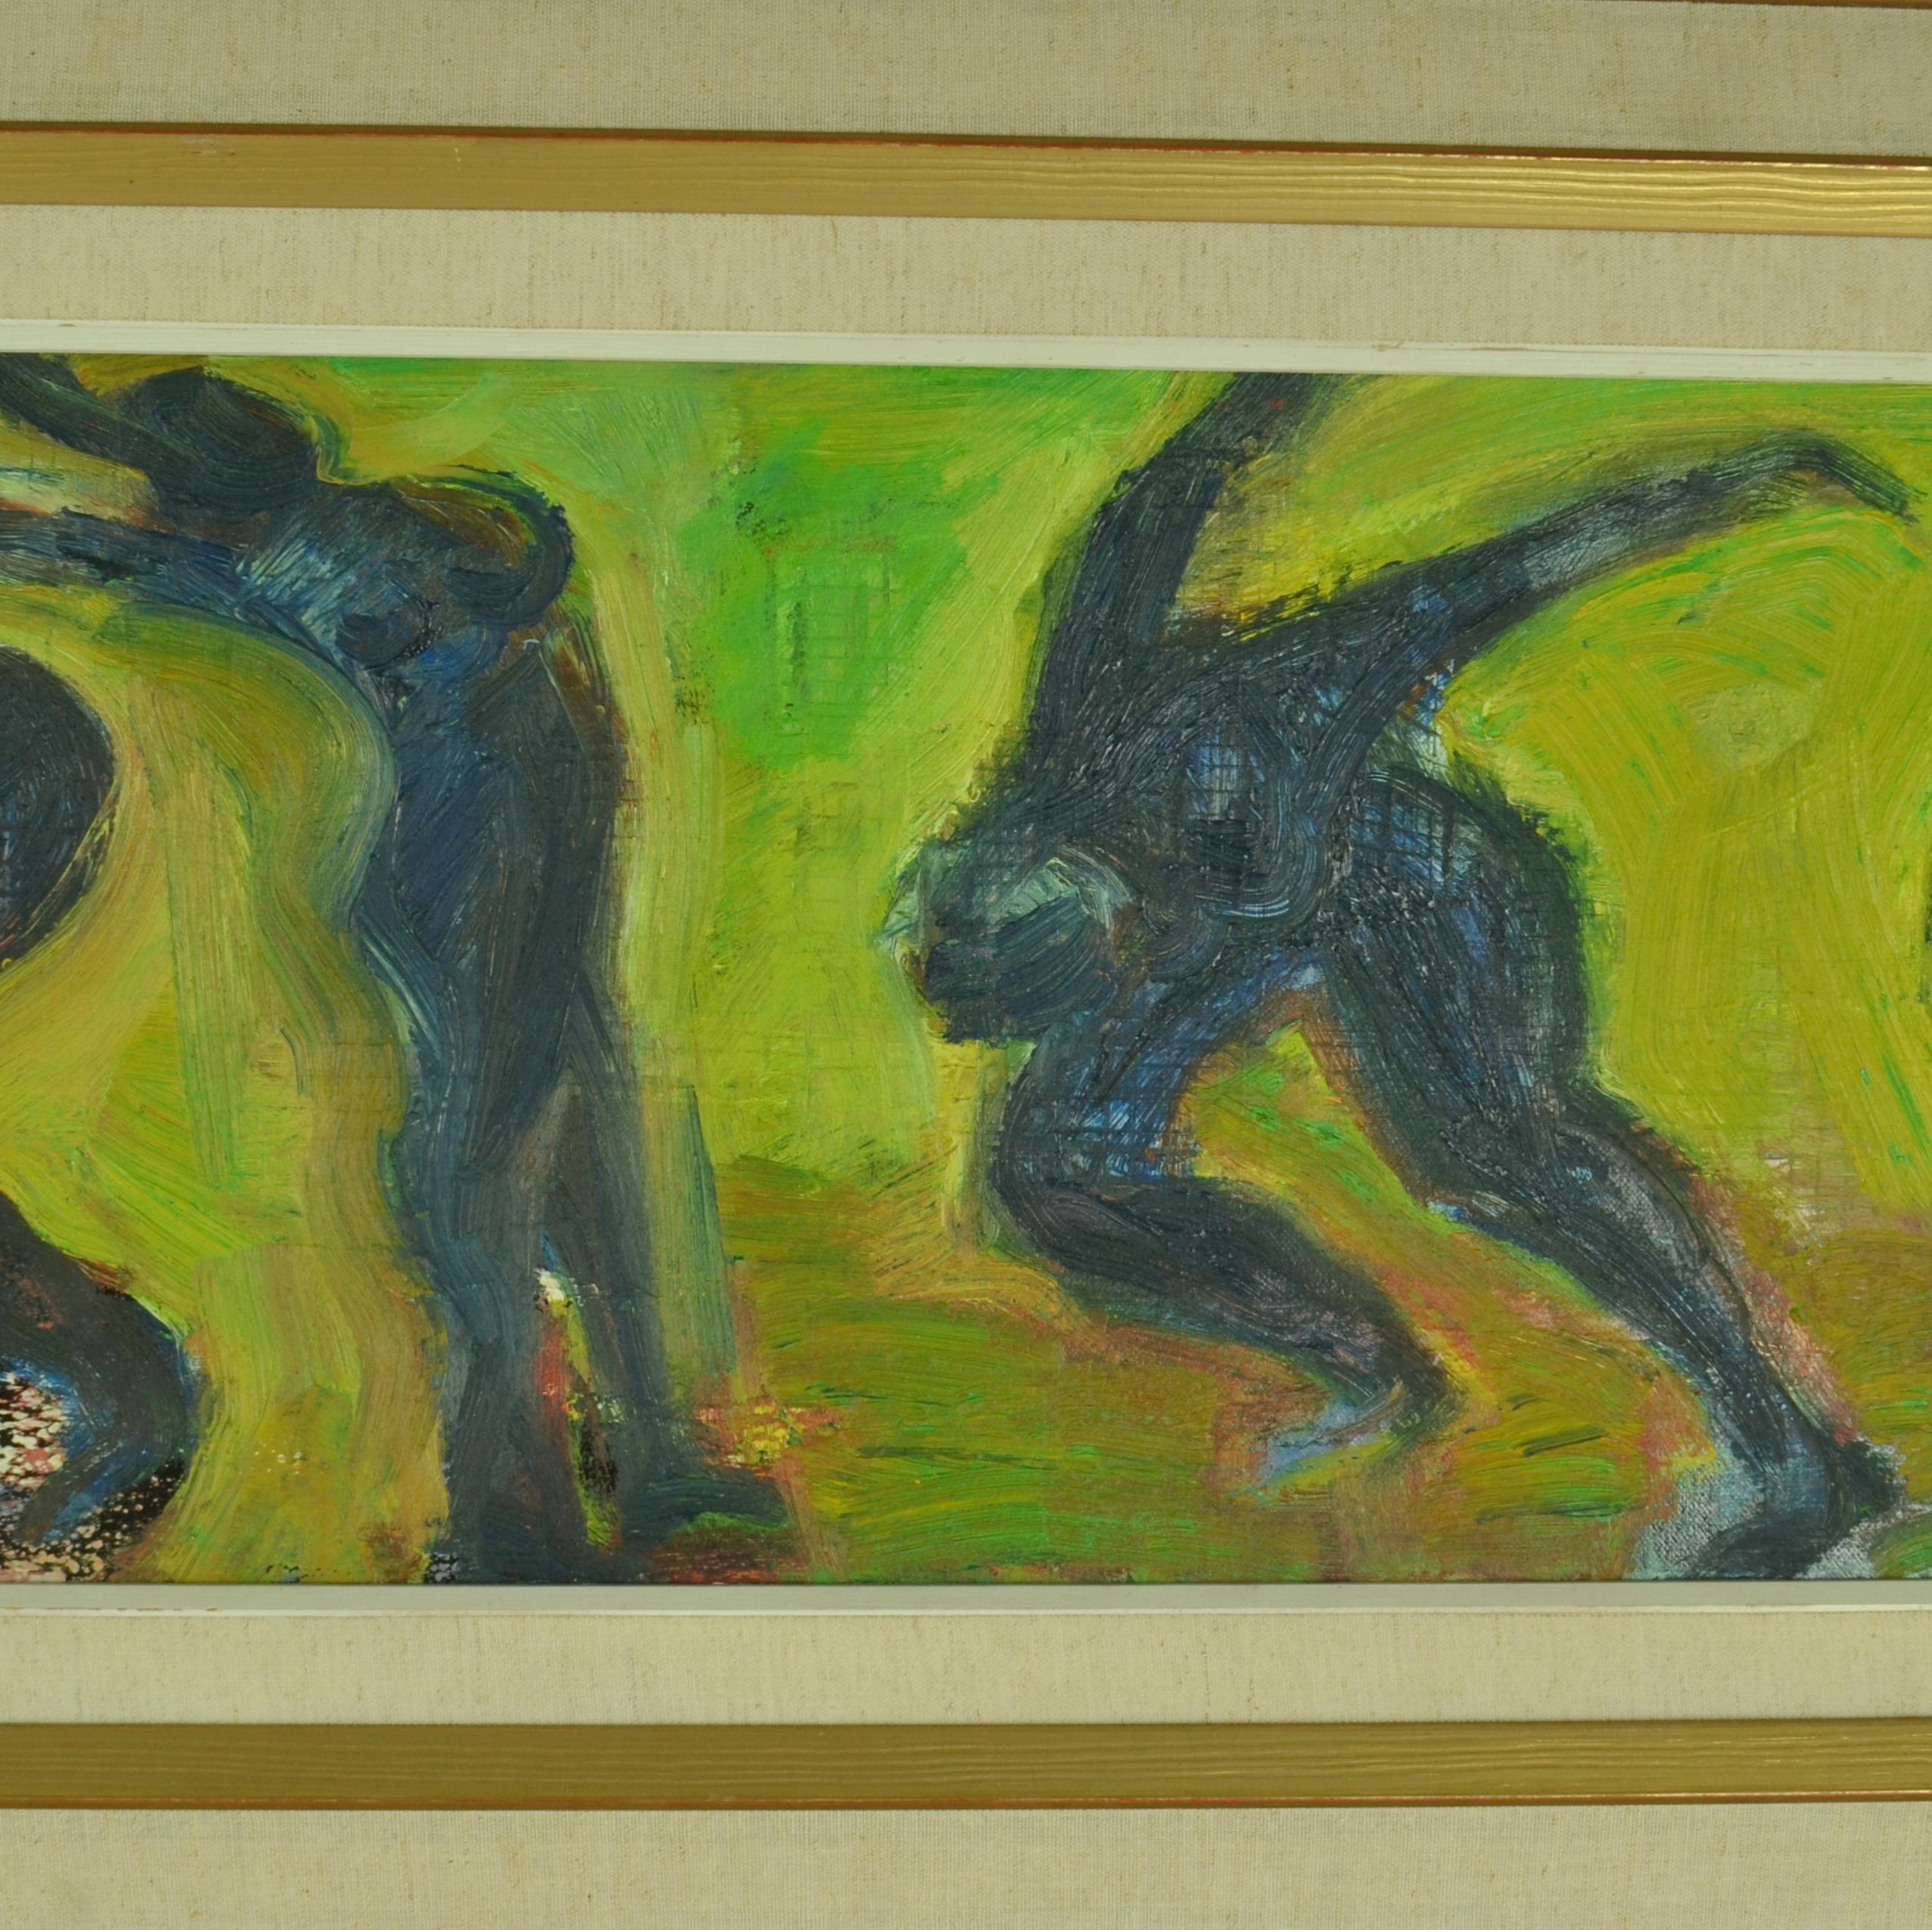 Dynamic Swedish figurative painting of five contemporary dancing women in a green field by R. Dagstrom 1960's. The artist accentuated the expression by wild brush strokes following the movements. The five poses of the dancers lined up almost makes